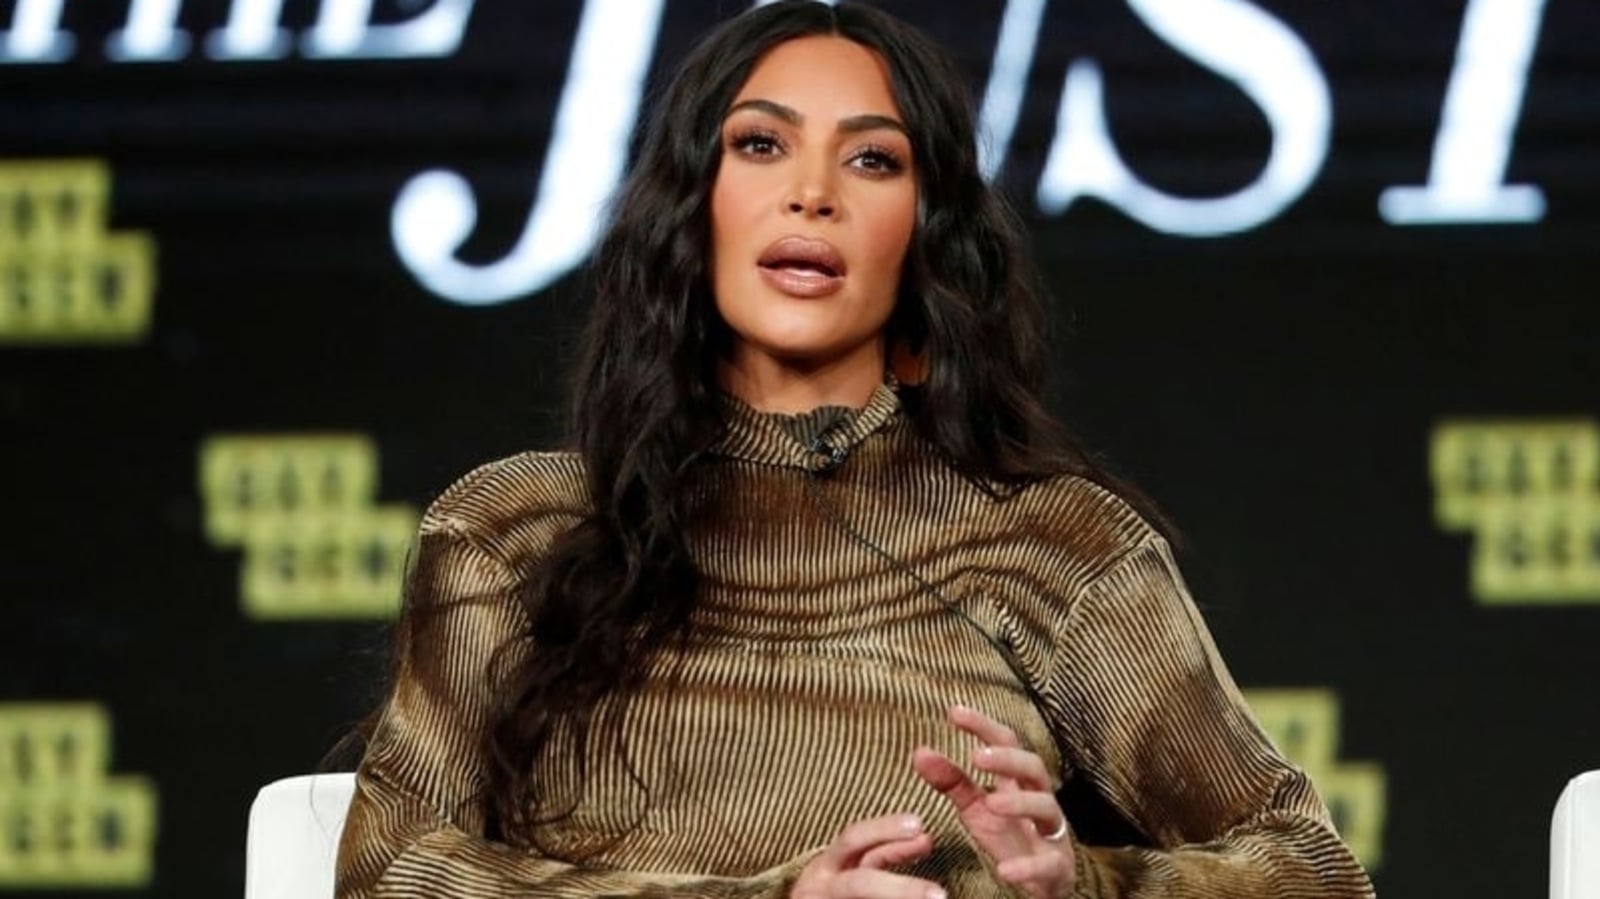 Kim Kardashian Instagram followers count is huge, but family just